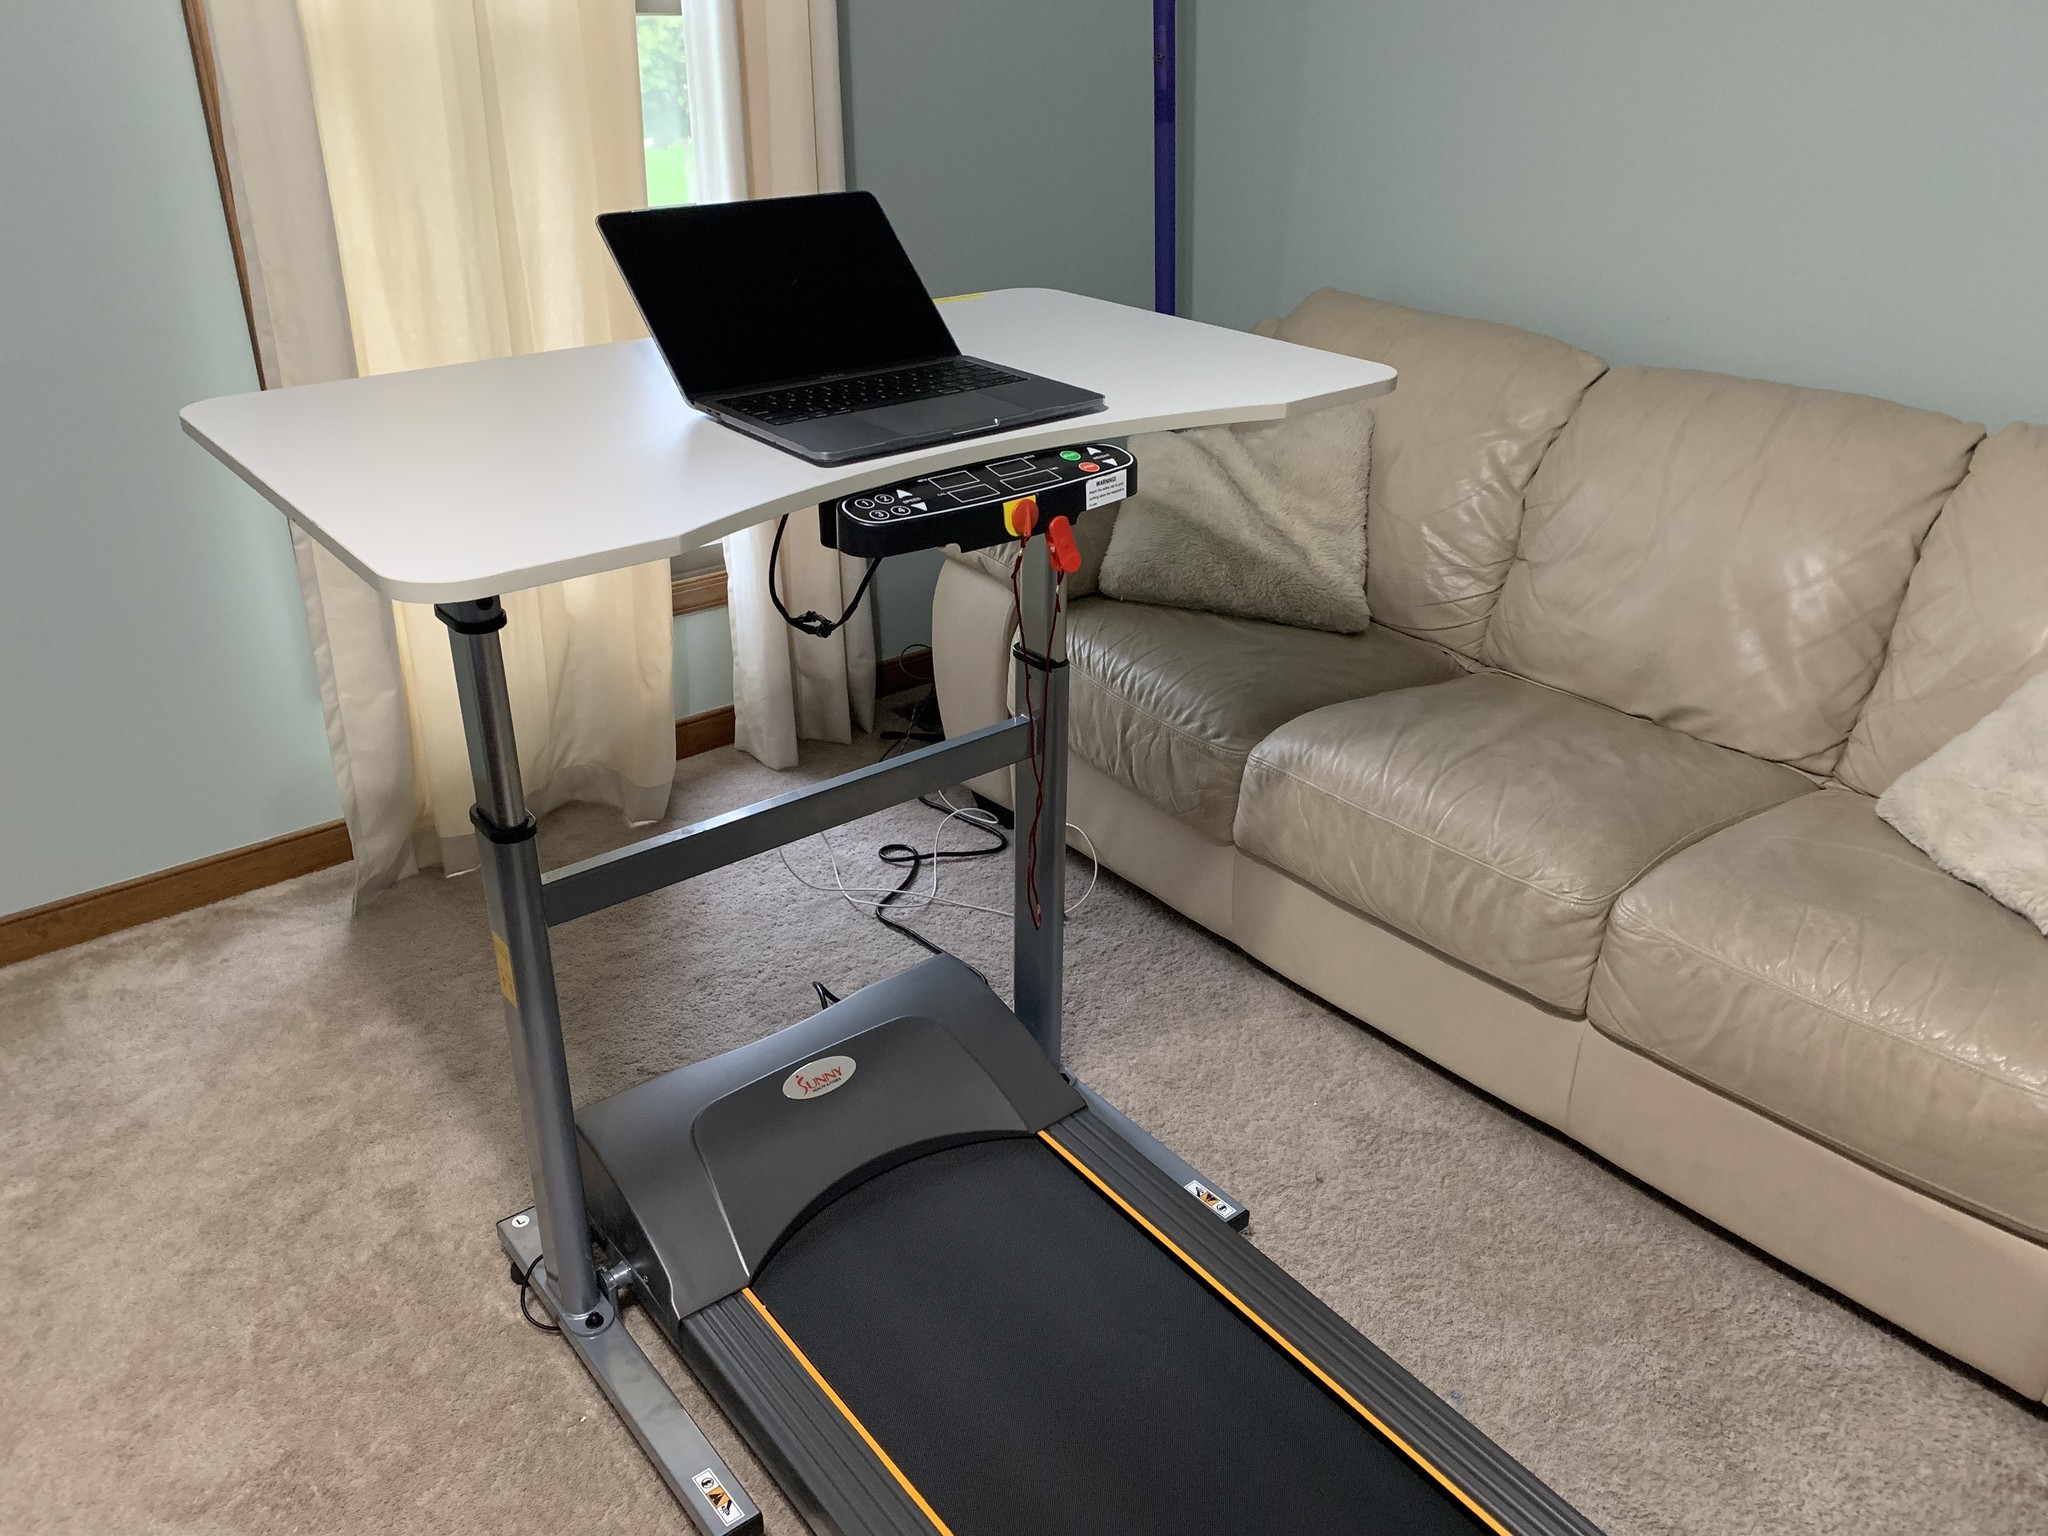 Sunny Health Fitness Treadmill Desk Review Get Fit While You